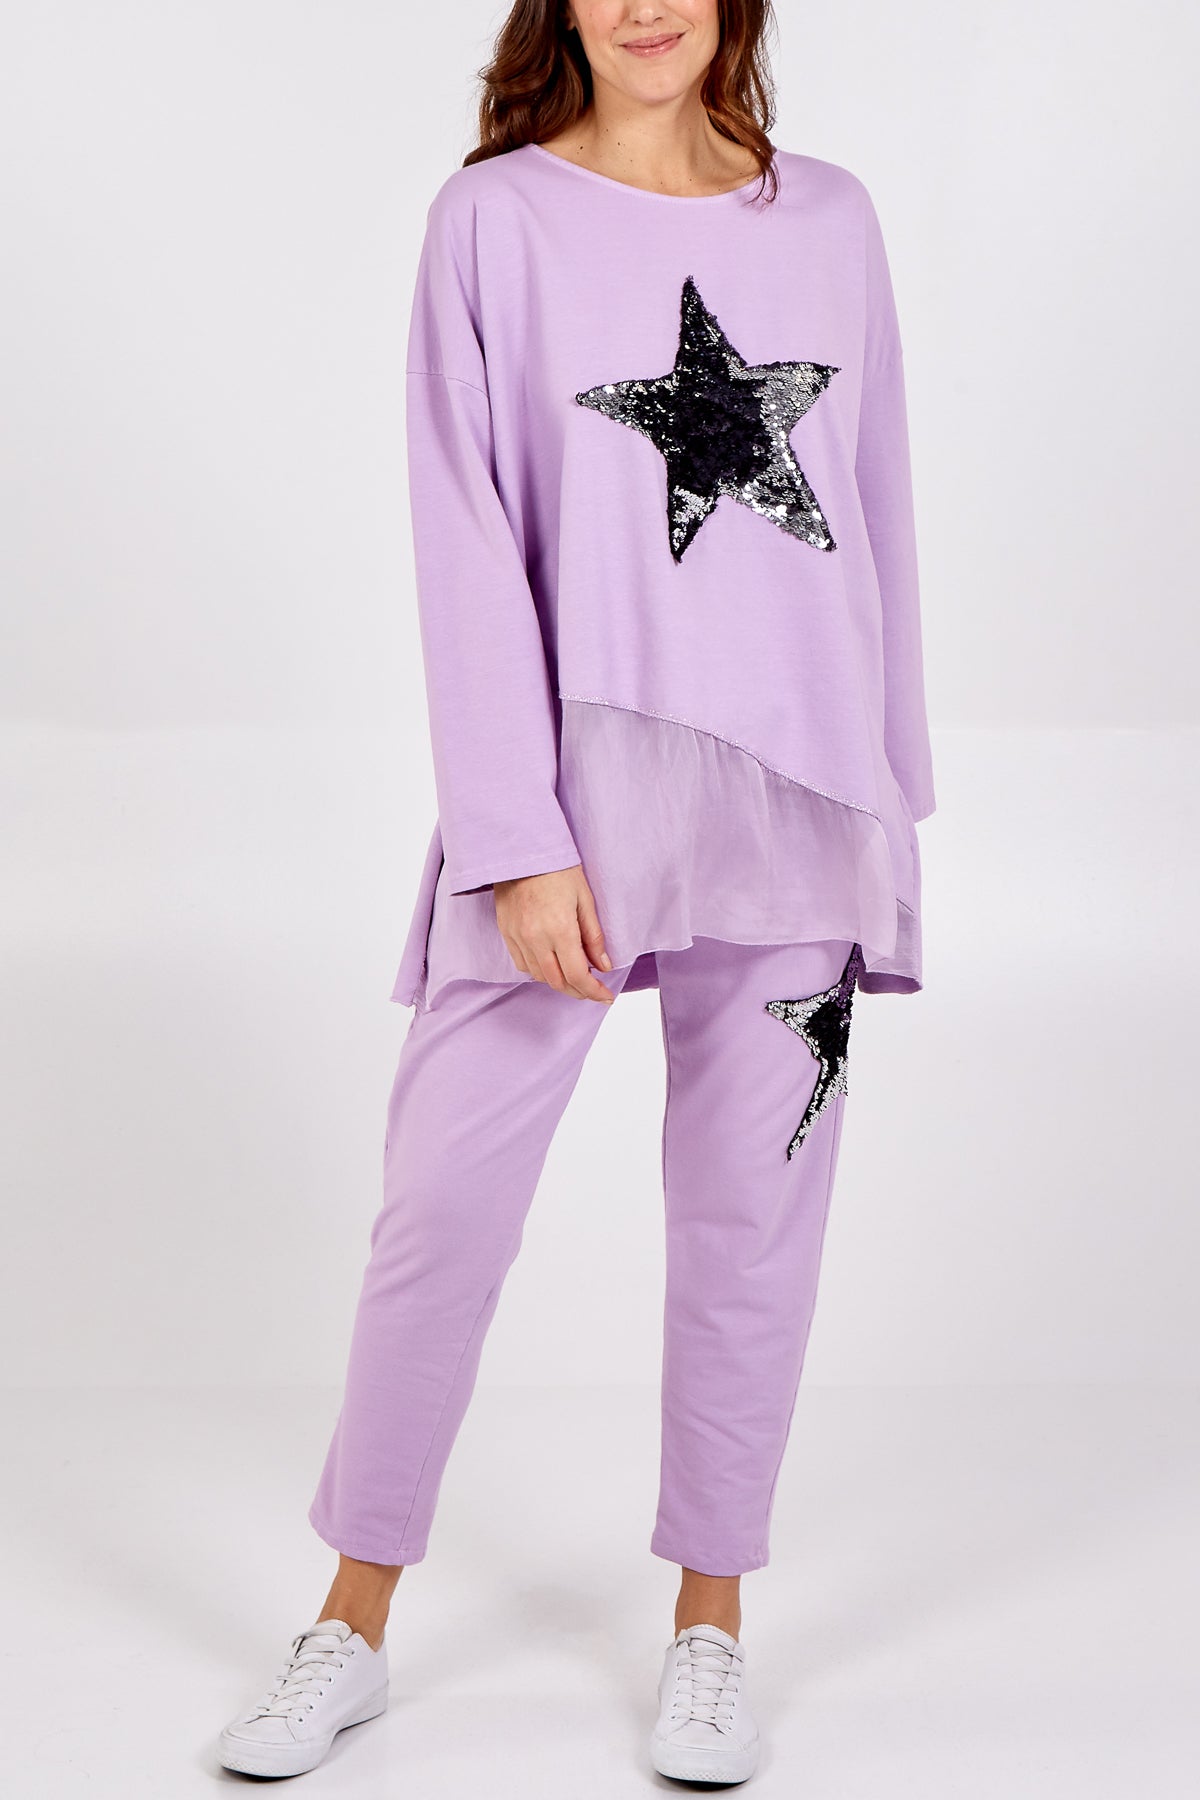 Sequin Star Trousers